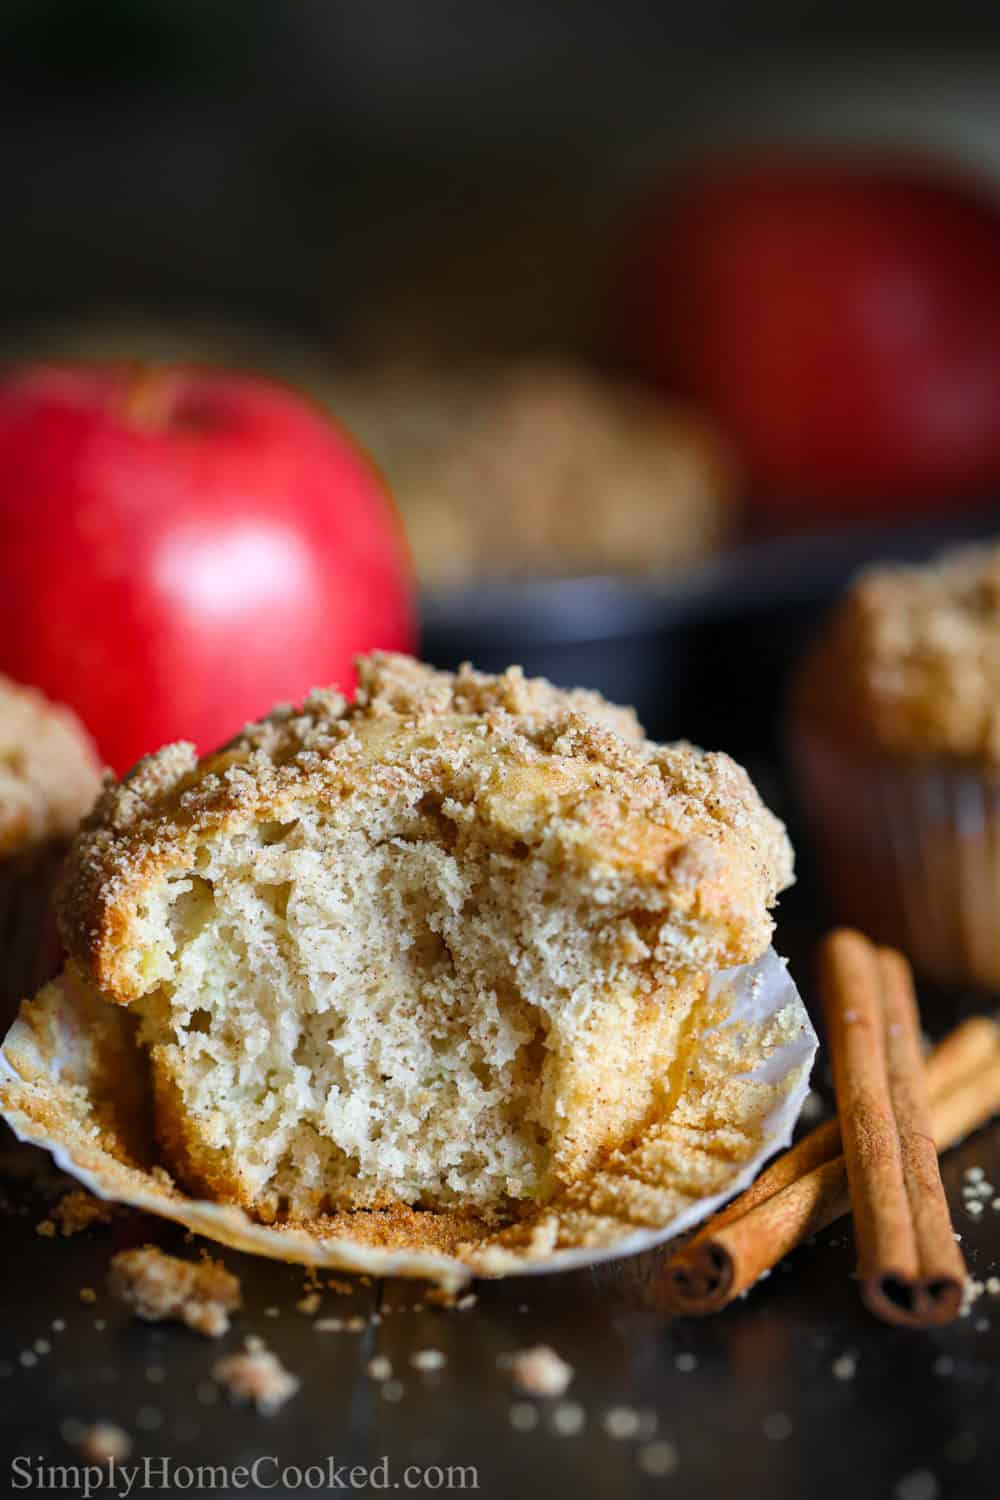 A single apple muffin that is partially bitten. An apple behind the muffin and 2 cinnamon sticks next to the muffin